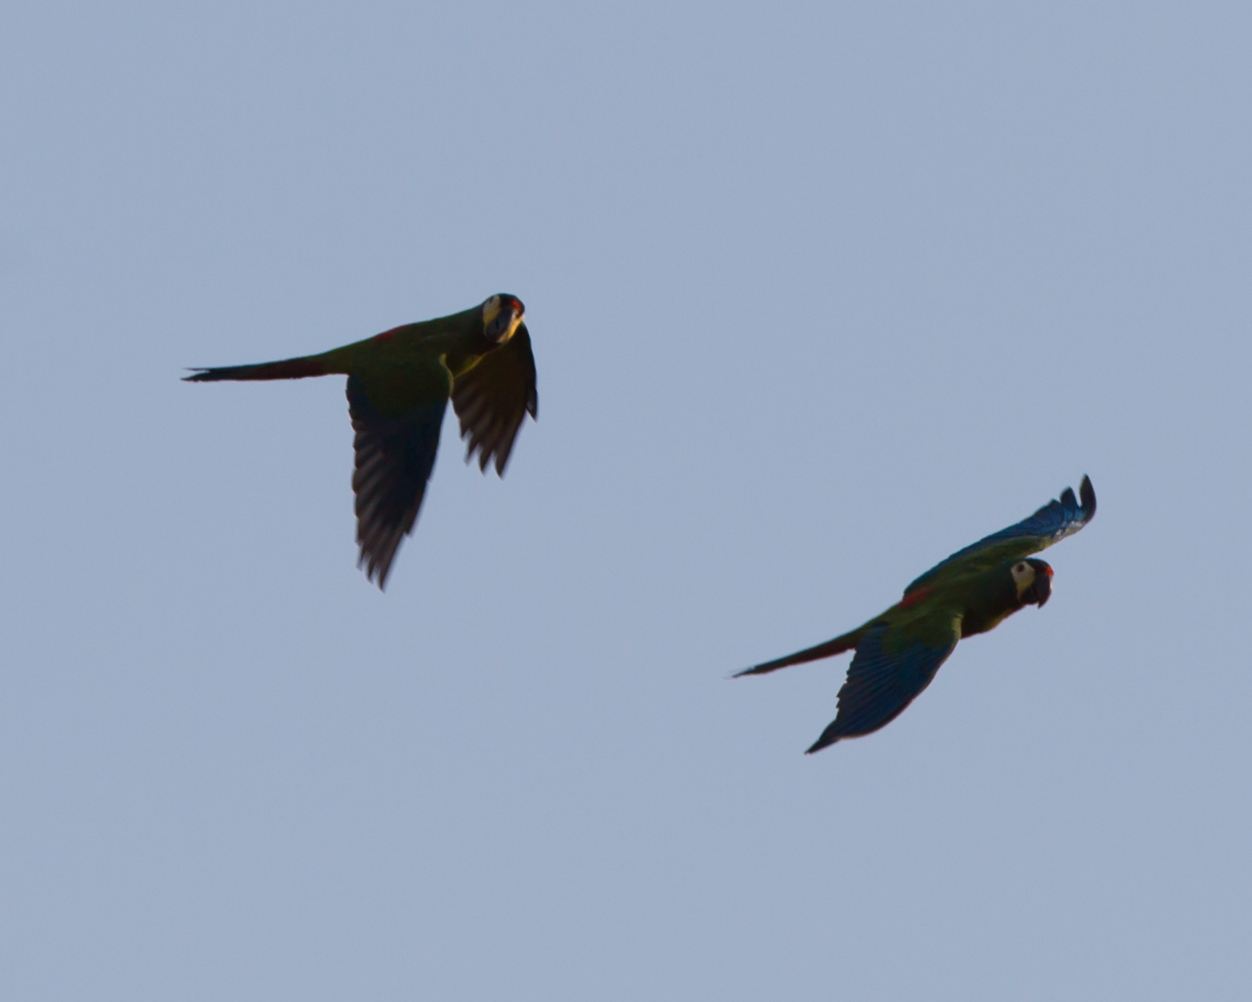 Blue-winged Macaws